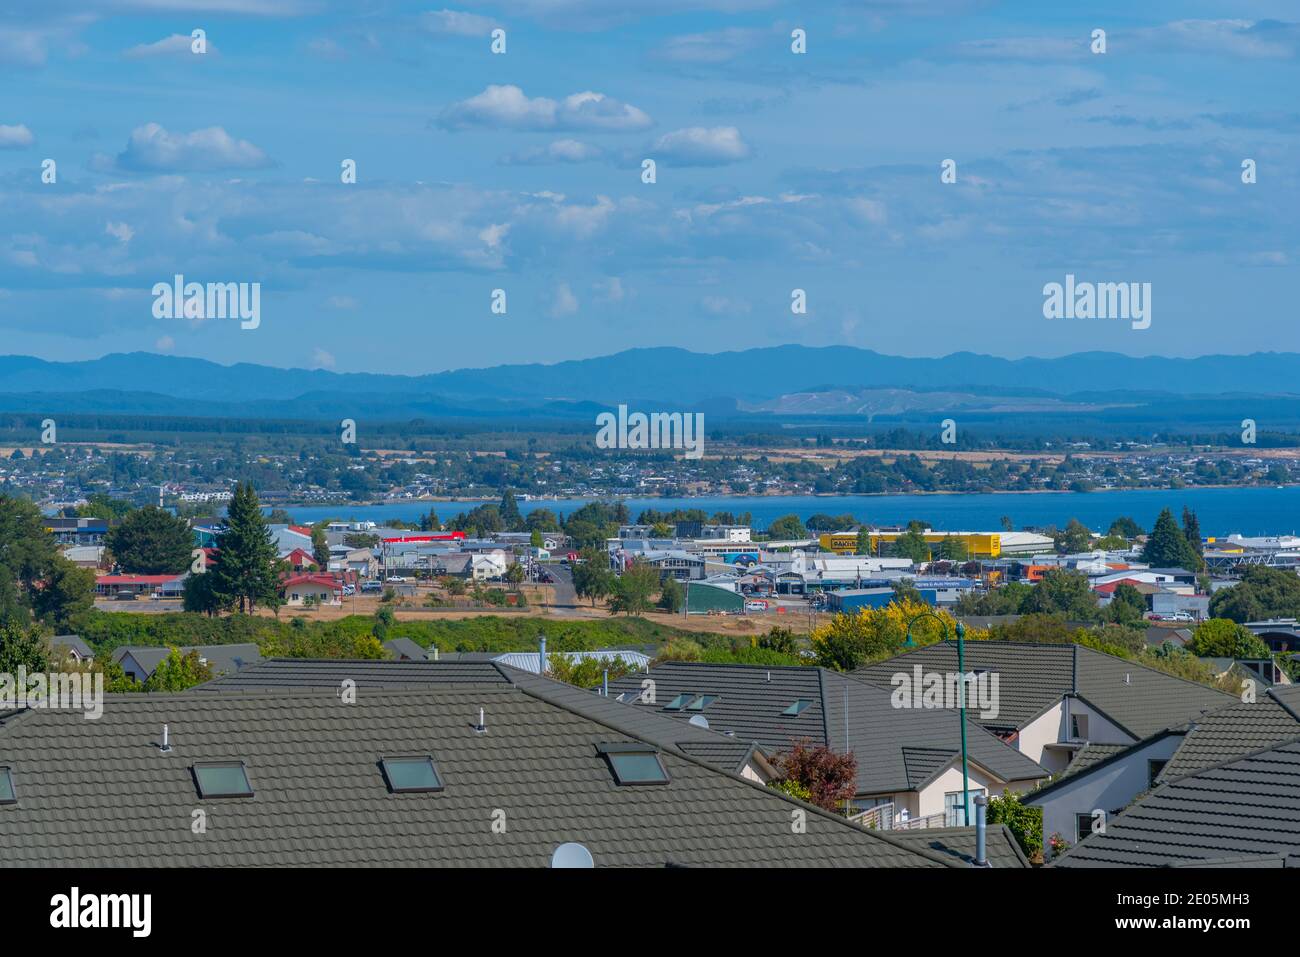 TAUPO, NEW ZEALAND, FEBRUARY 12, 2020: Aerial view of Taupo town in New Zealand Stock Photo